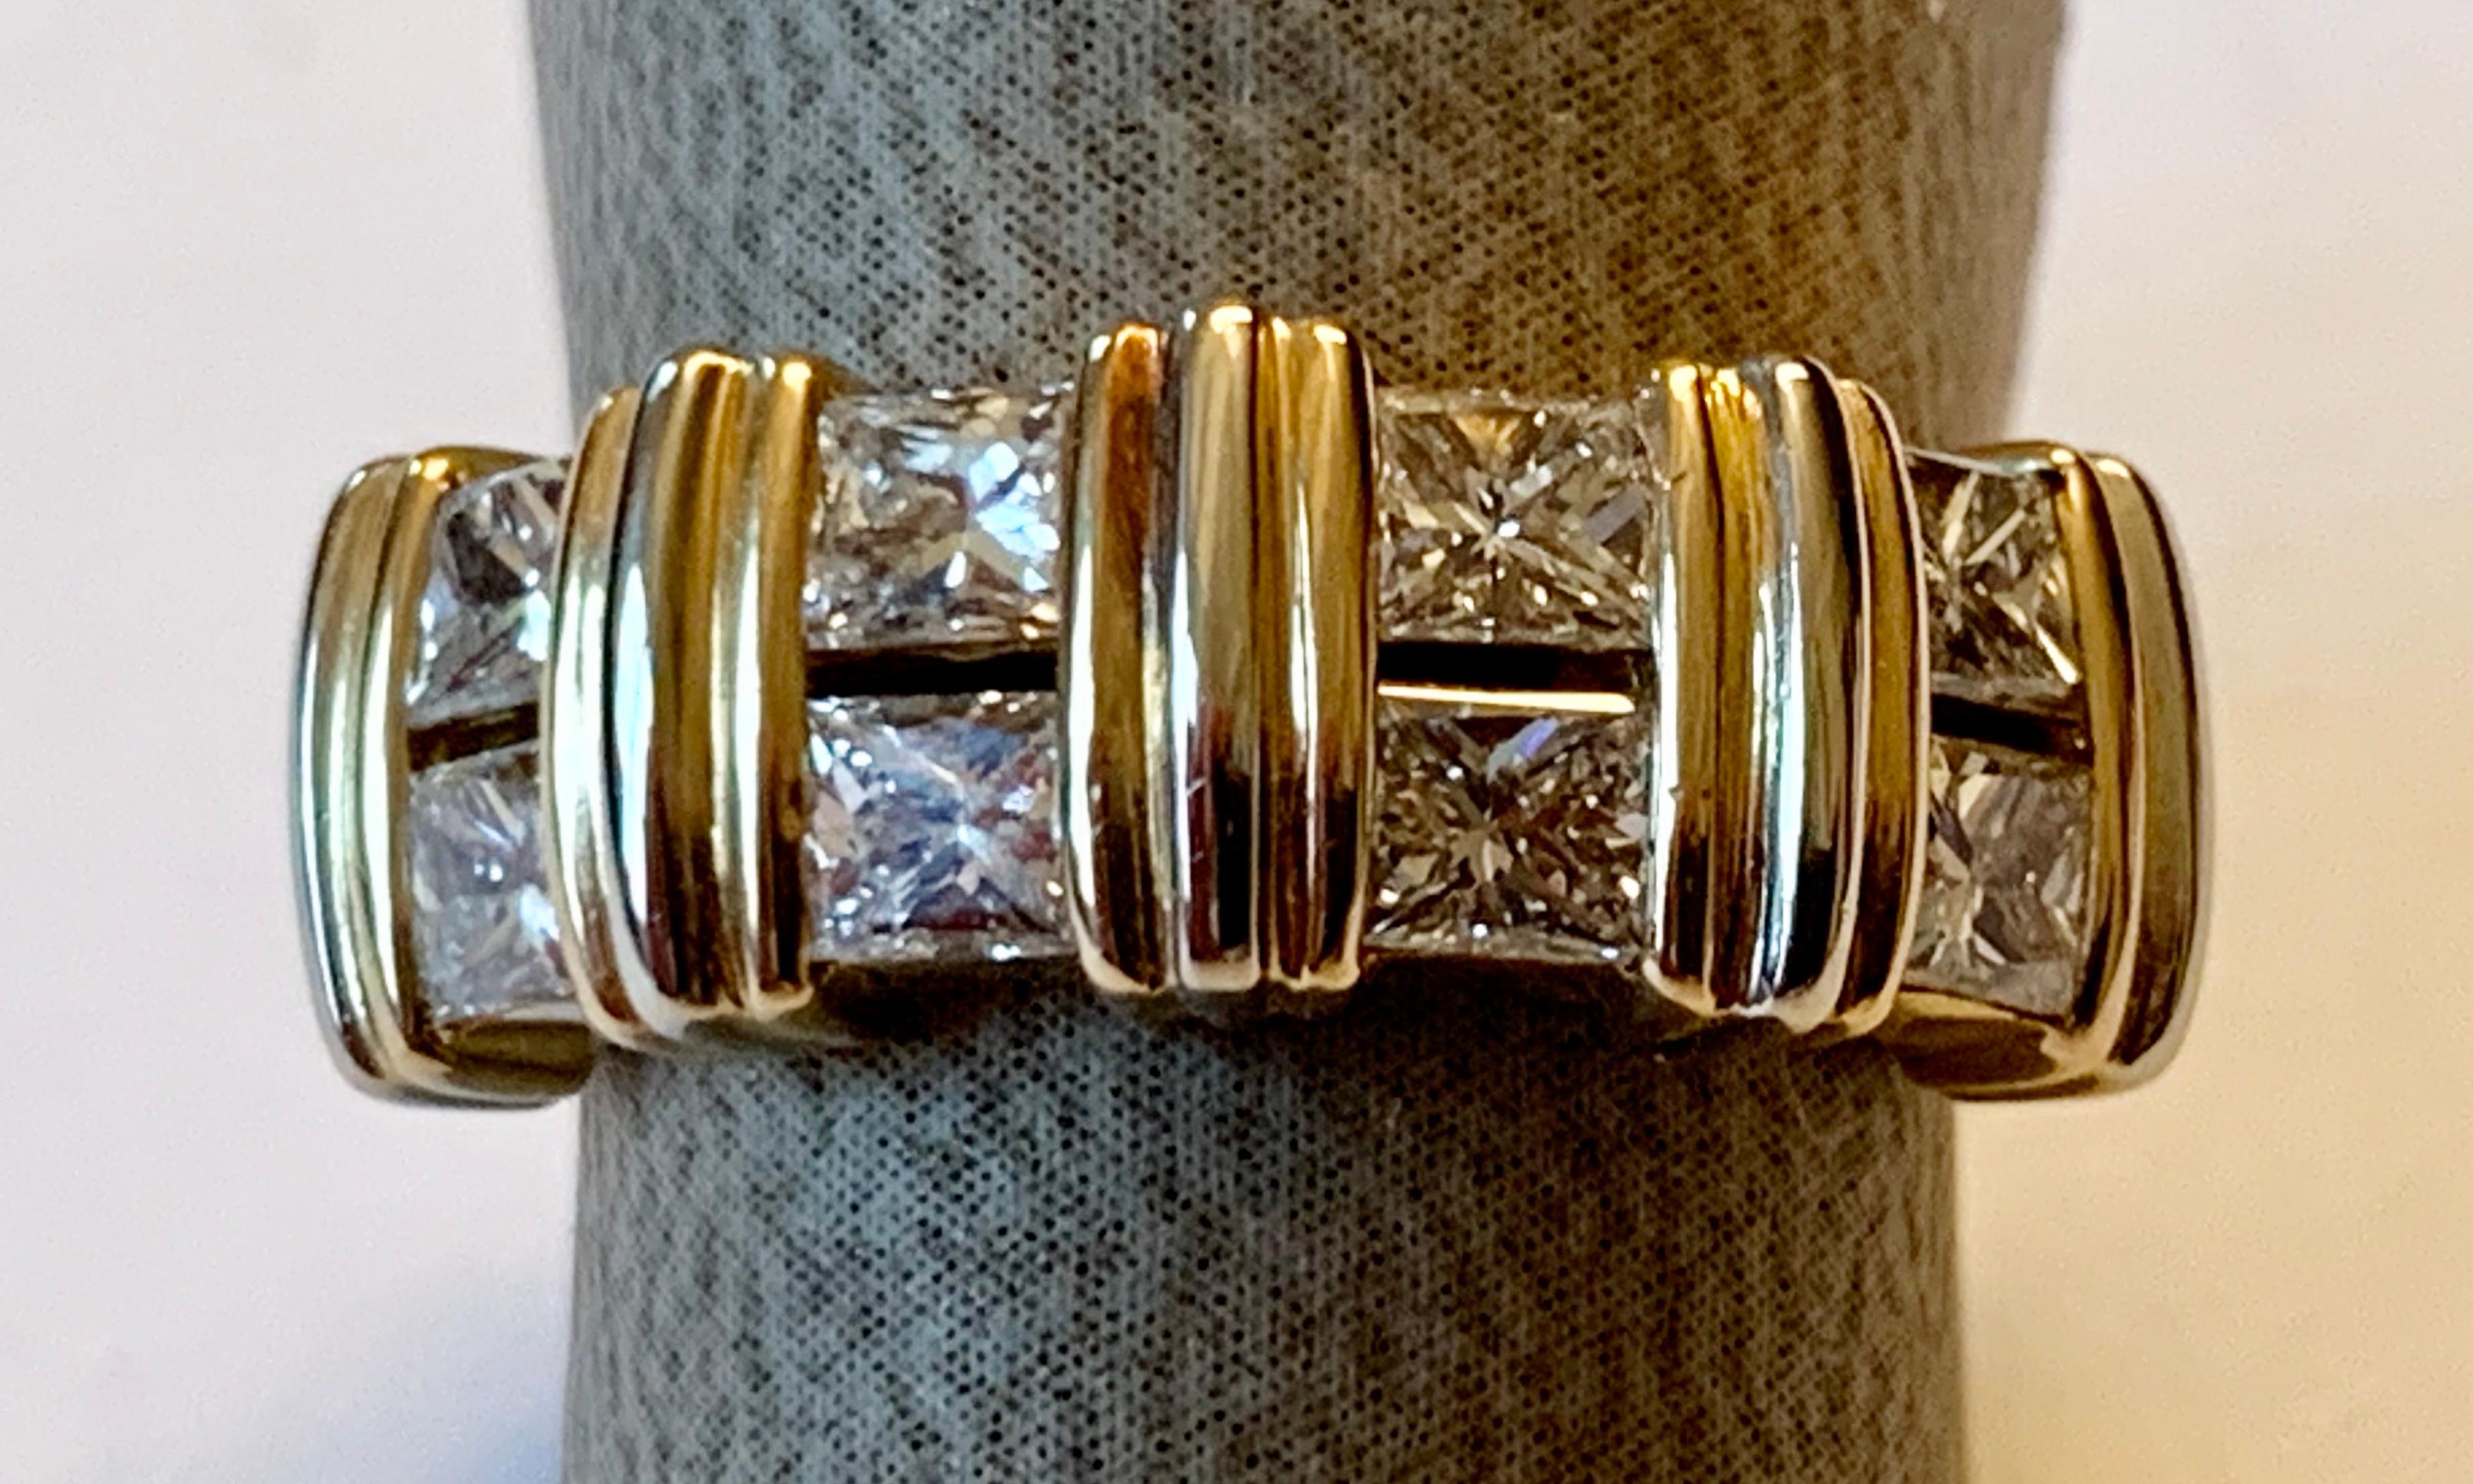 This lovely authentic Vintage band ring is by Cartier, crafted from 18k yellow gold with a polished finish features eight  princess cut Diamonds of approximately 0.90 ct, G color, vs clarity ,mounted at the front half of the band, each pair